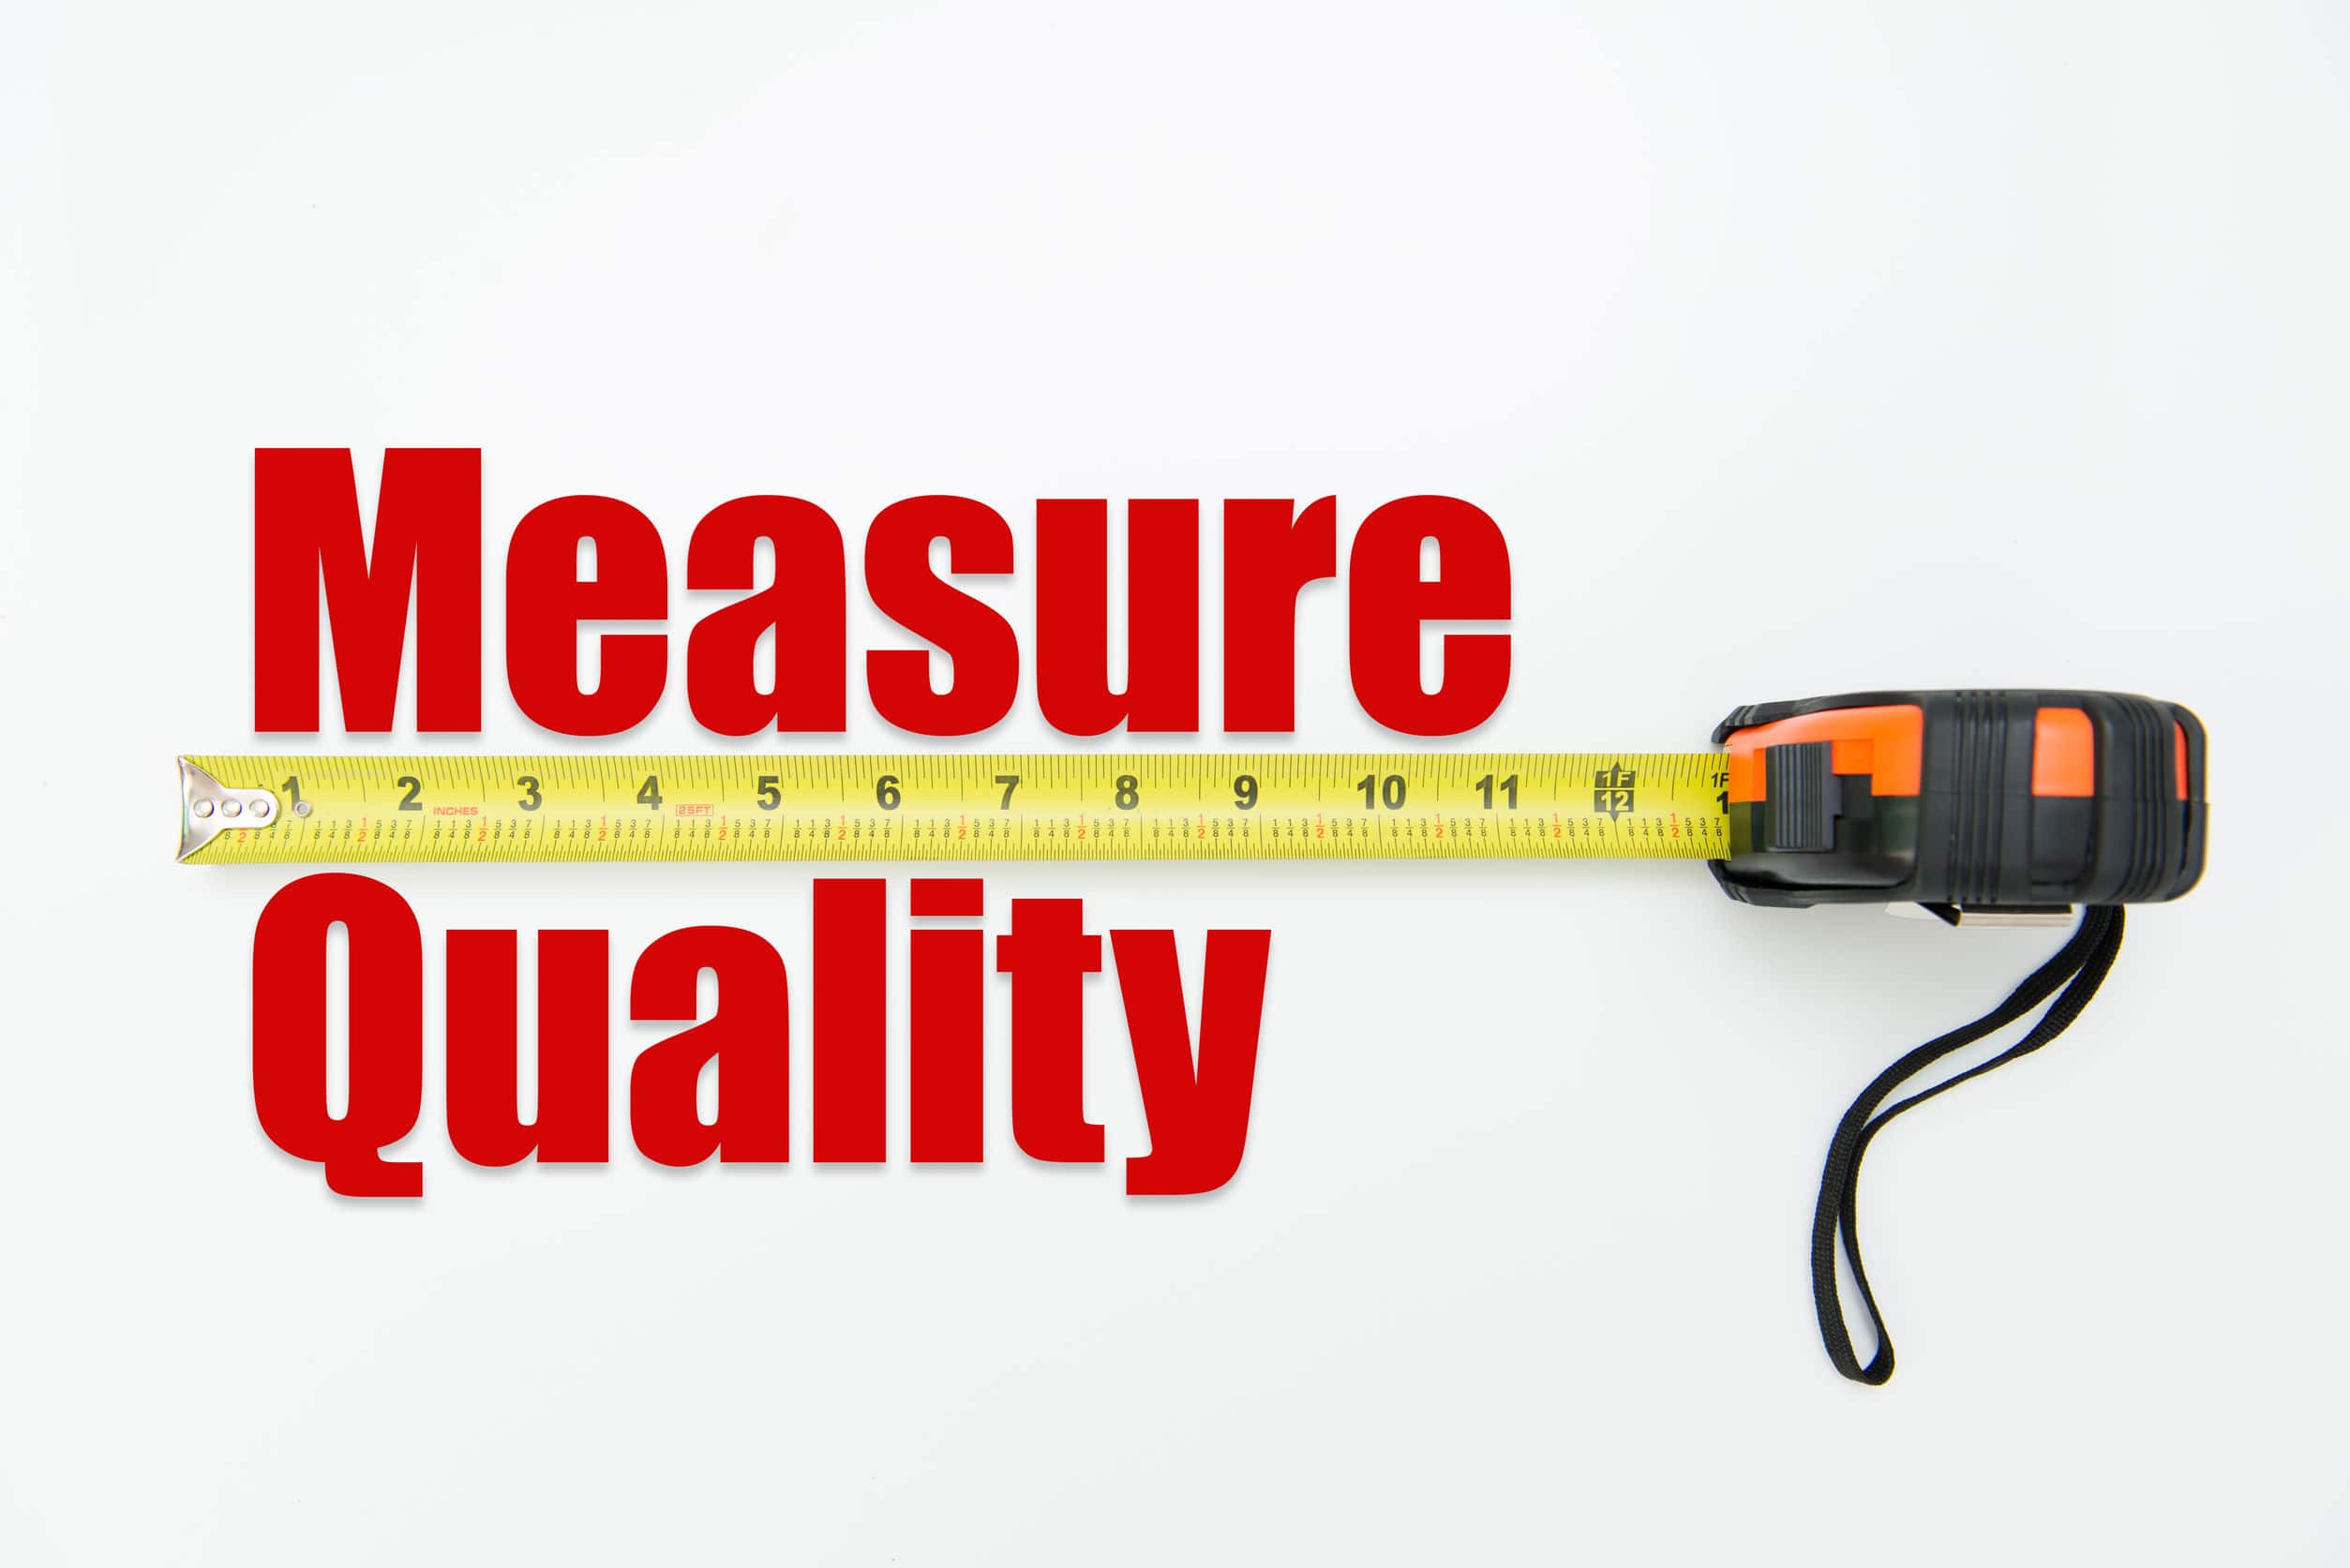 Measuring tape over the words measure and quality